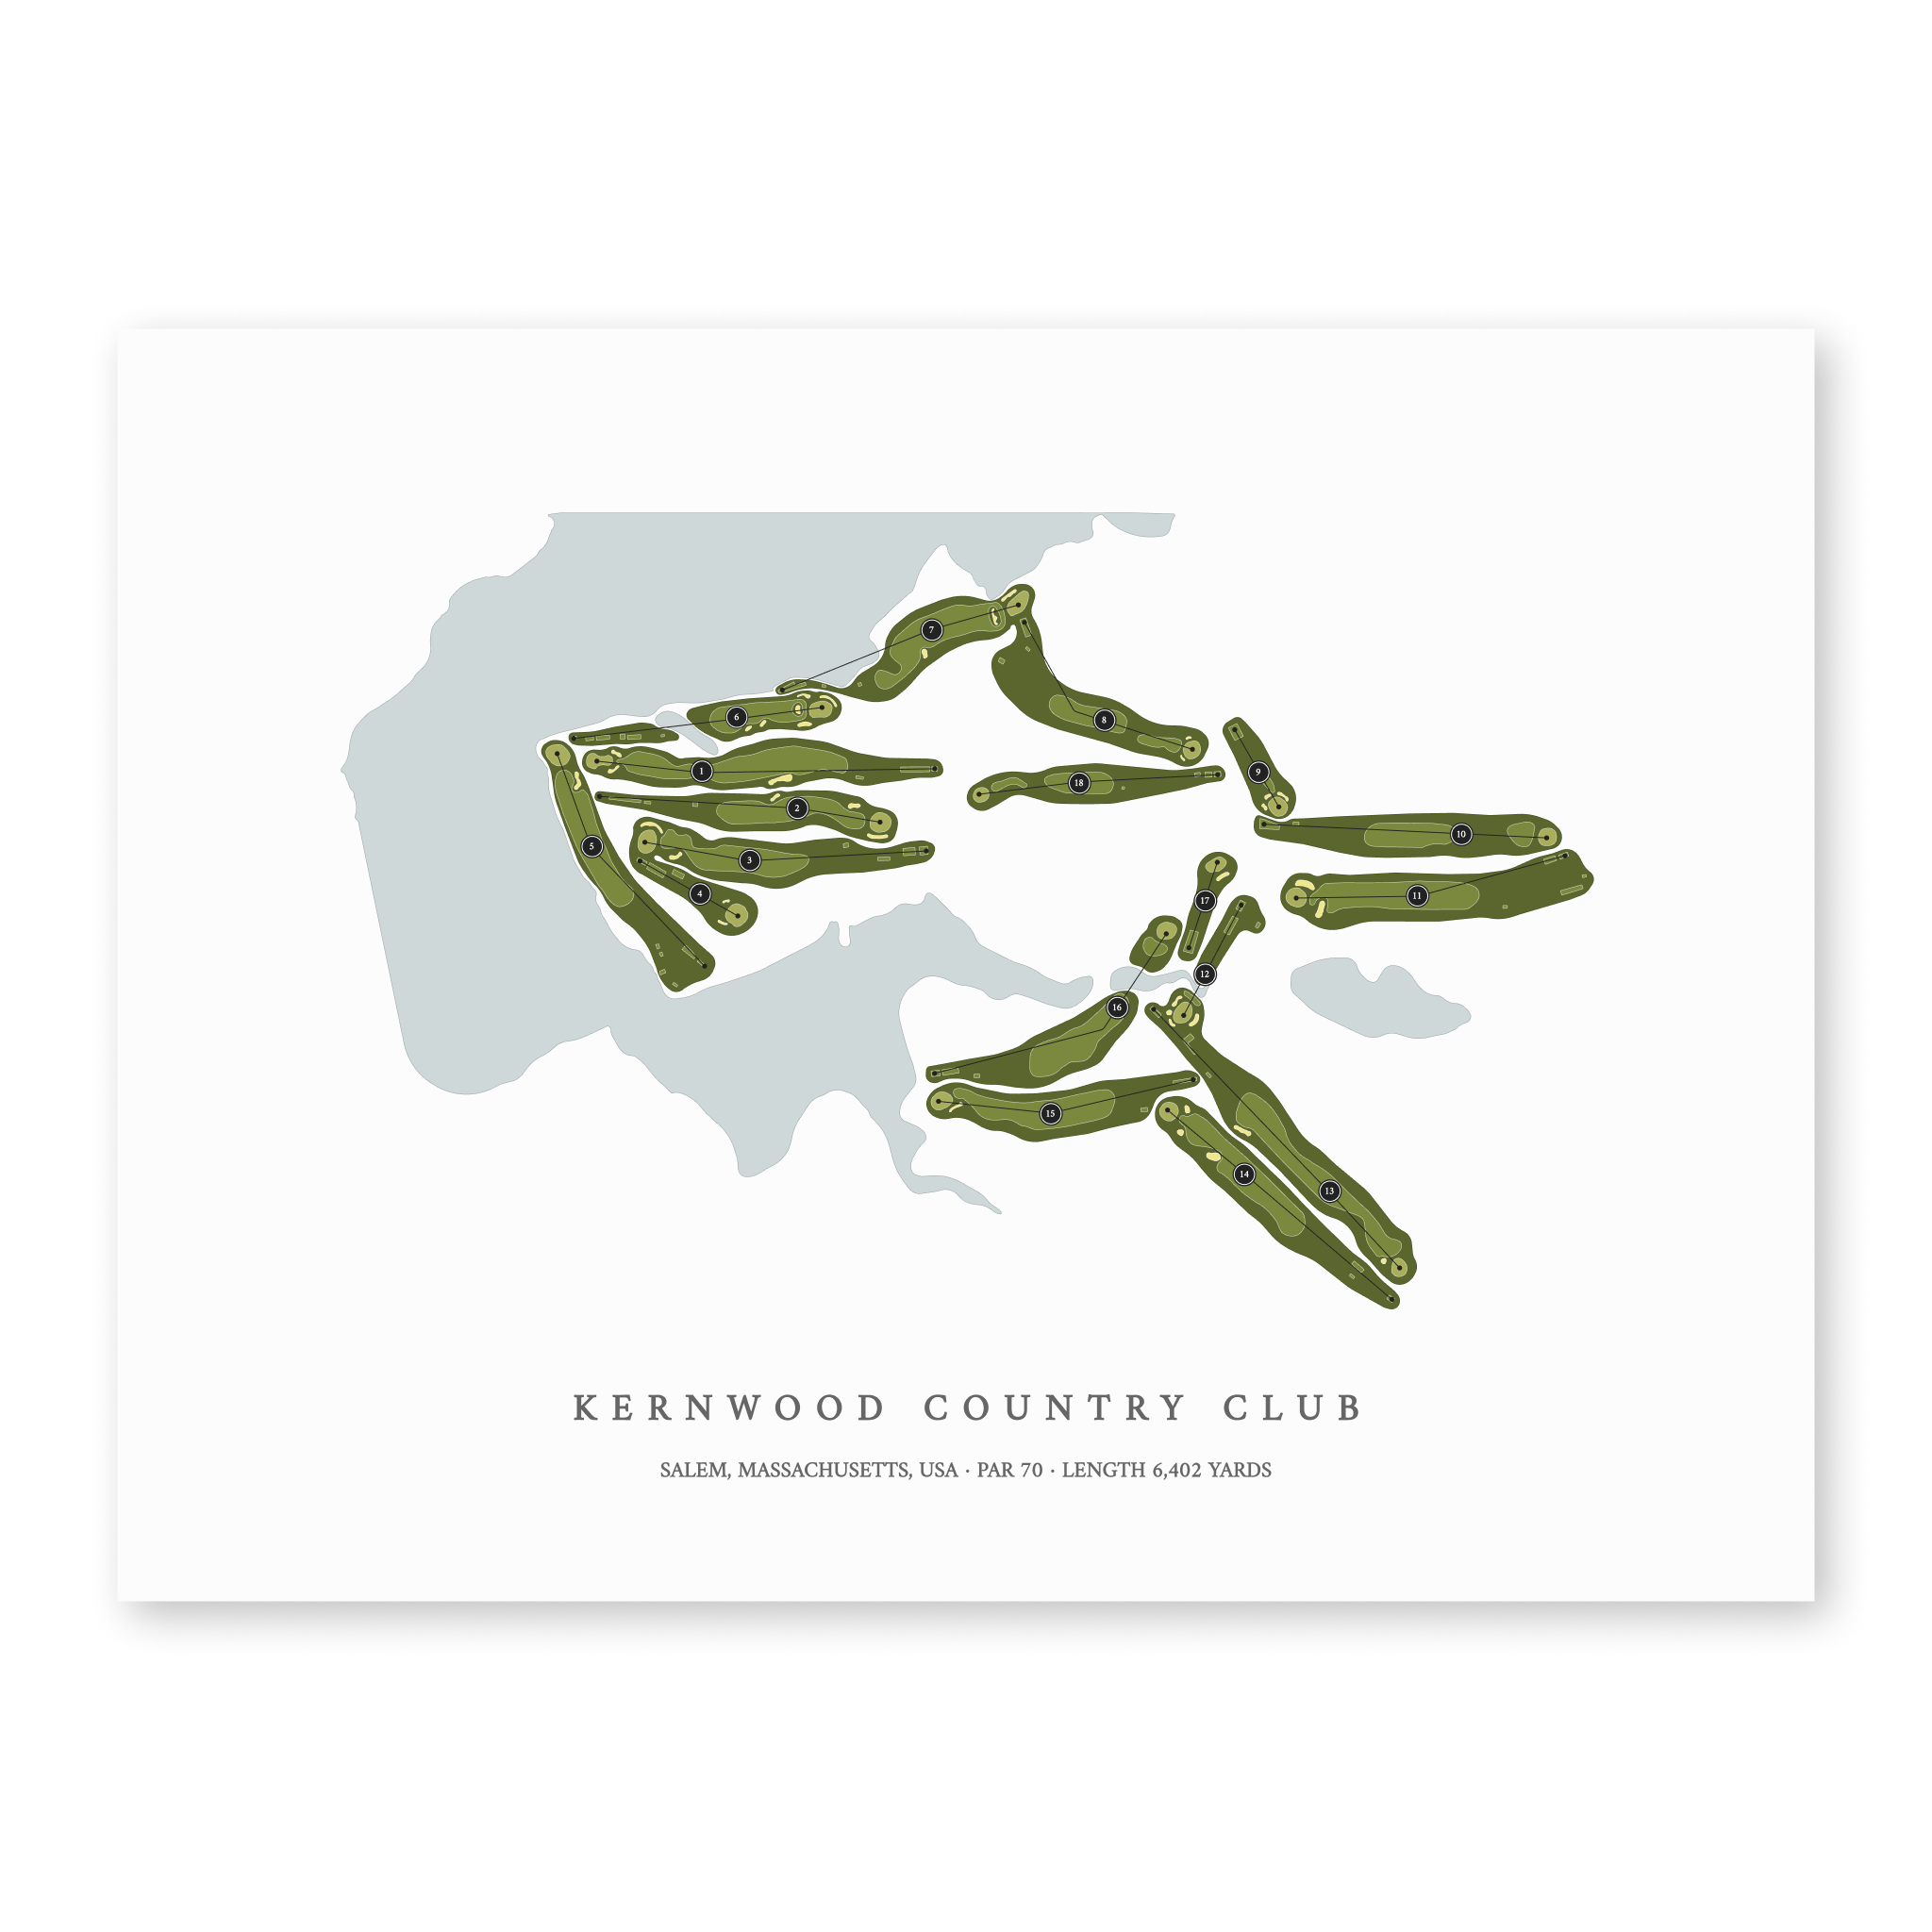 Kernwood Country Club| Golf Course Print | Unframed With Hole Numbers #hole numbers_yes